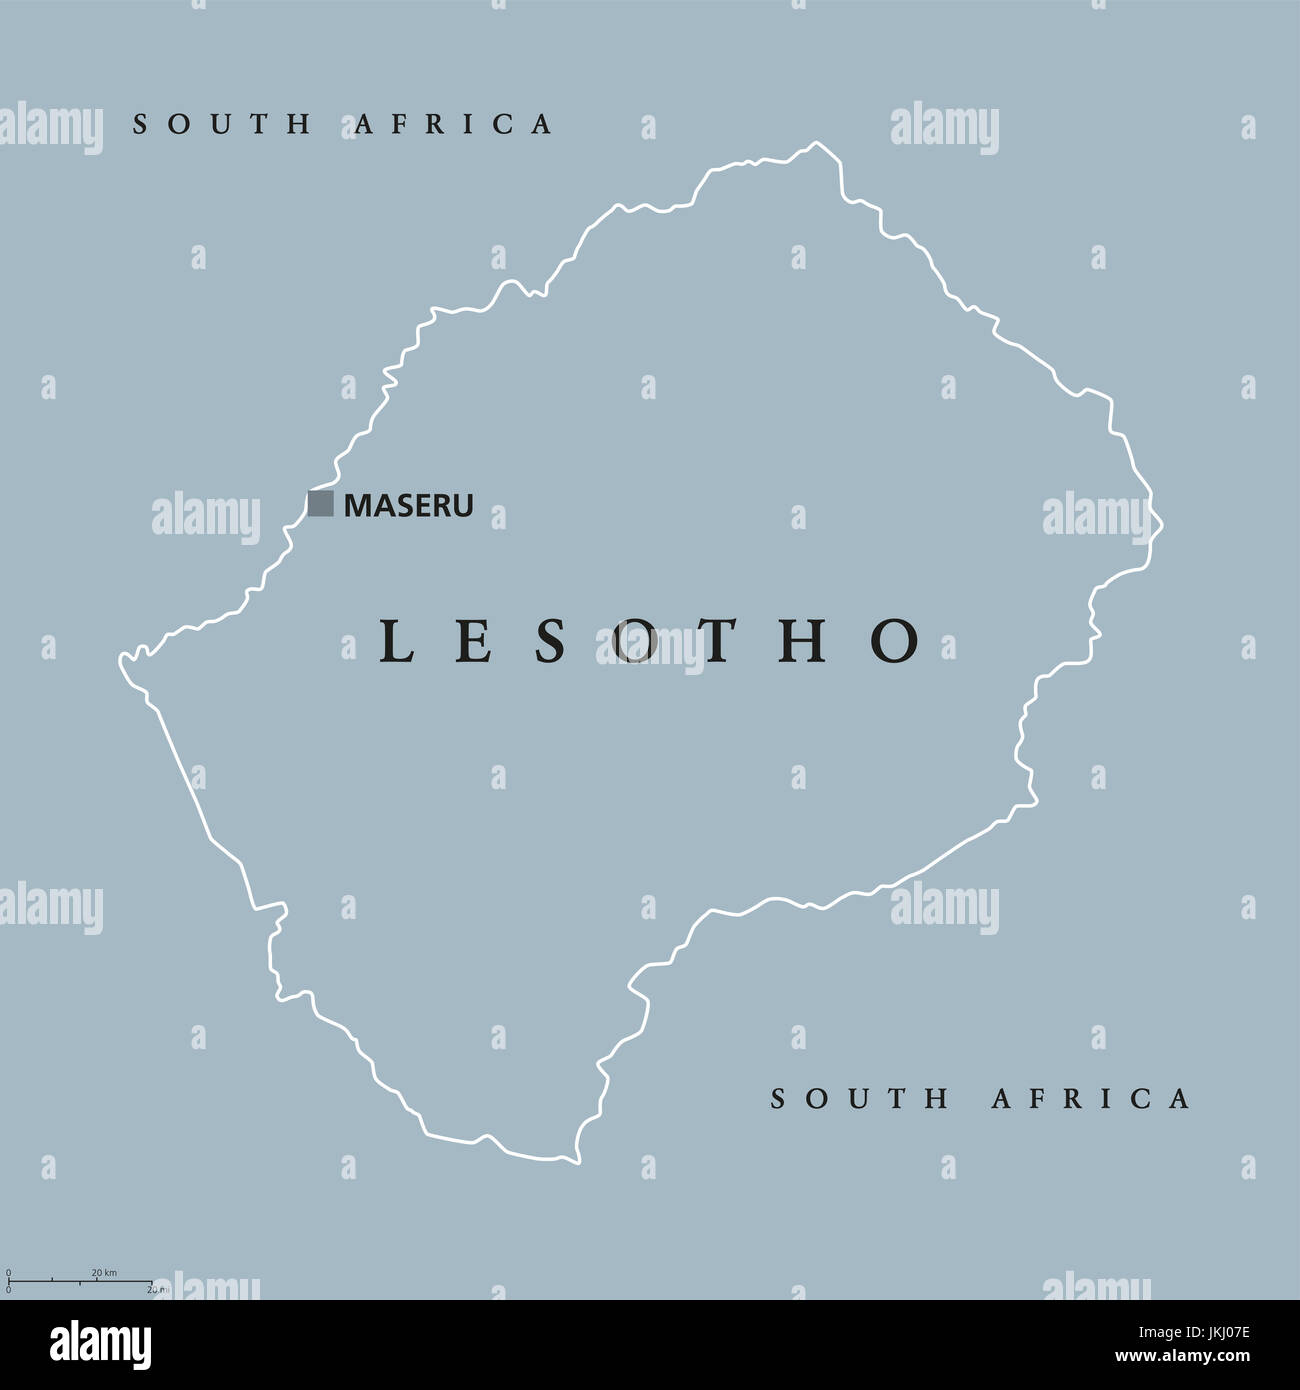 Lesotho political map with capital Maseru. Kingdom and landlocked country in South Africa. Previously known as Basutoland. Gray illustration. Stock Photo